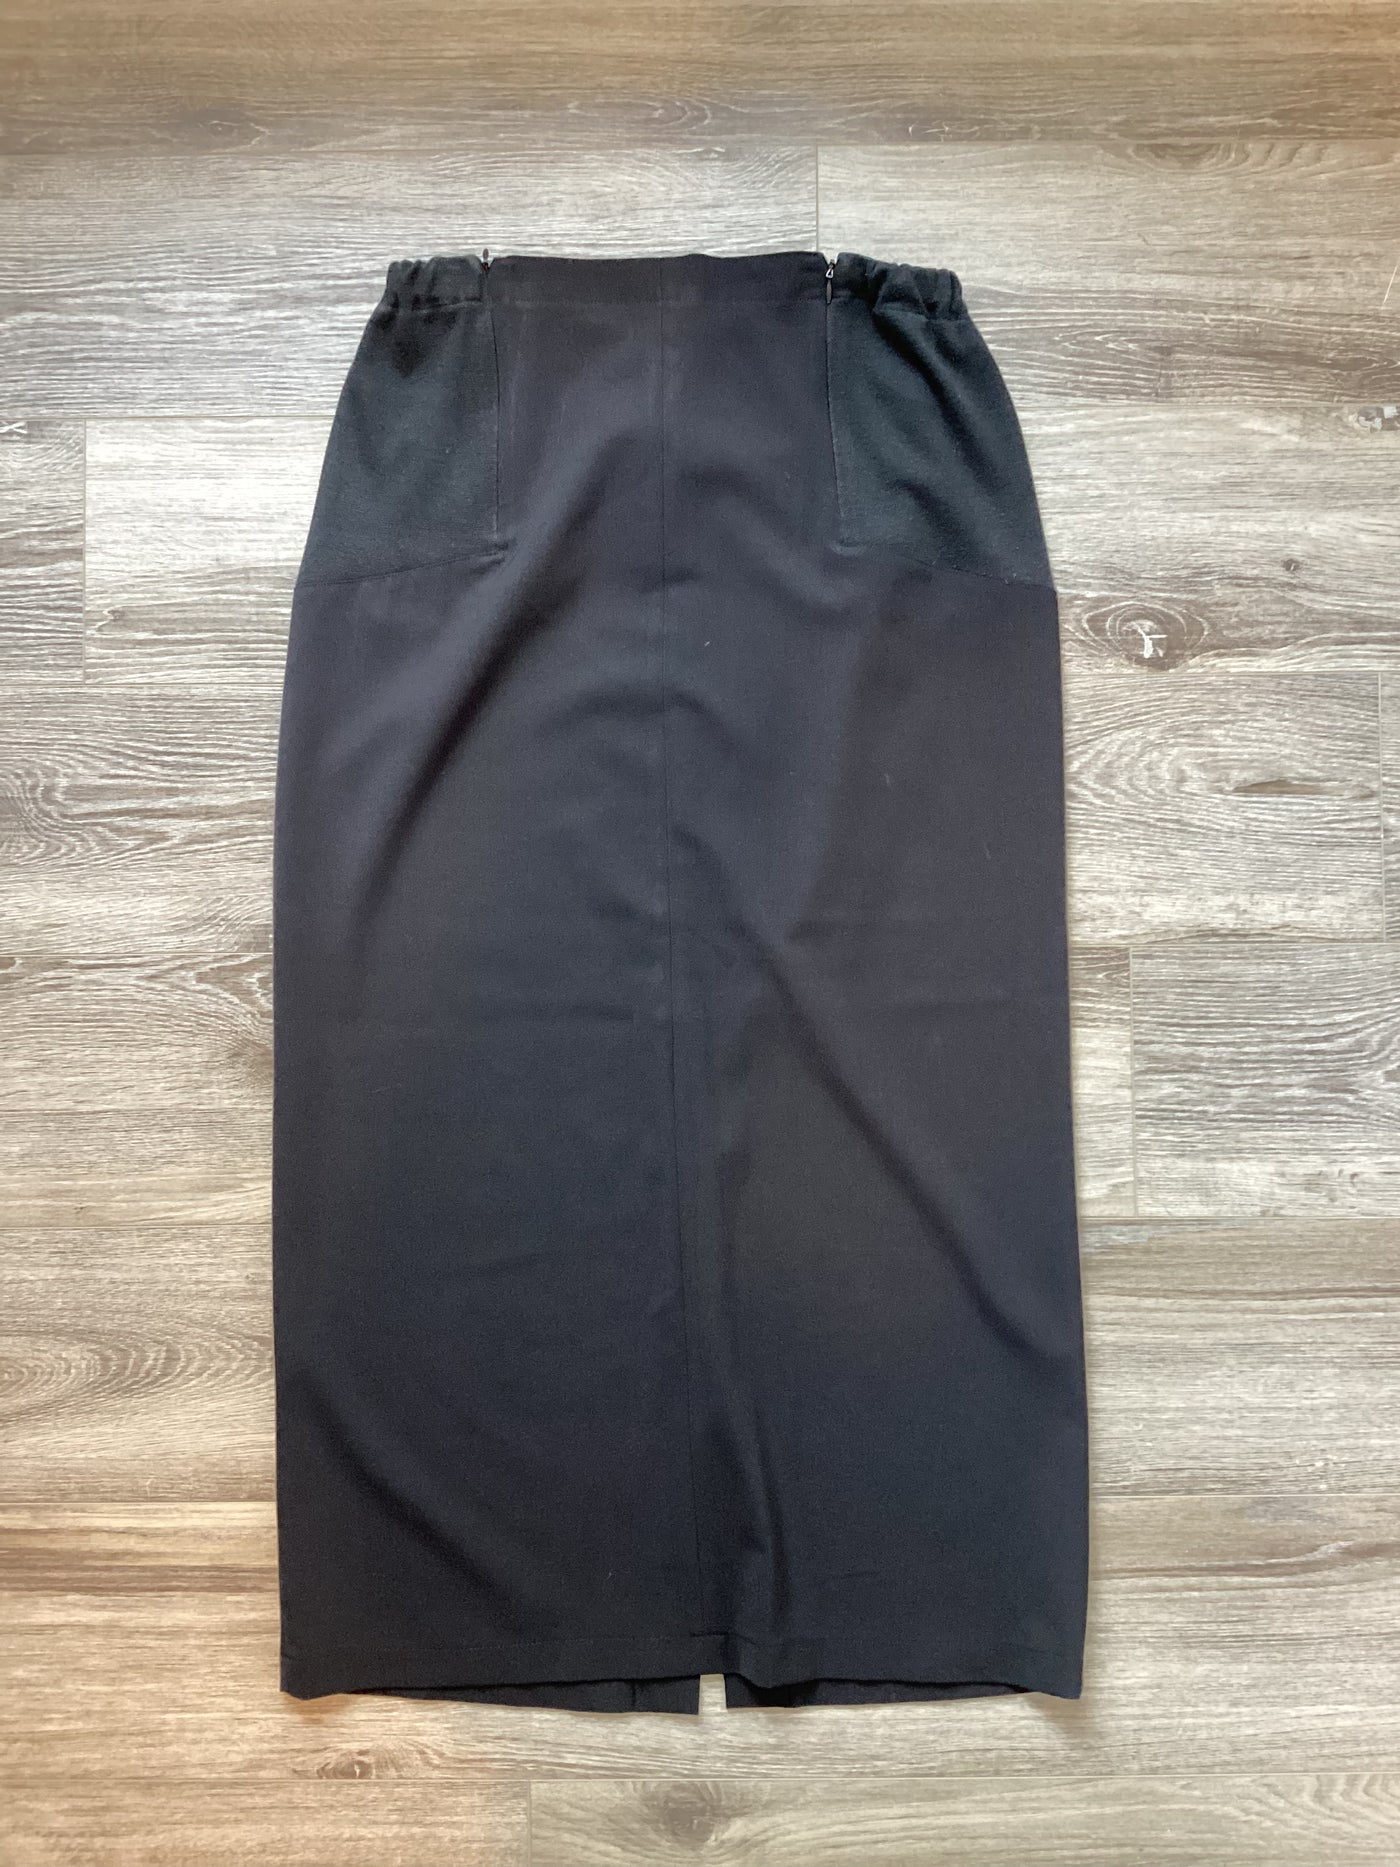 Formes Paris black maxi skirt with front zips - Size EUR 42 (Approx UK 12/14)